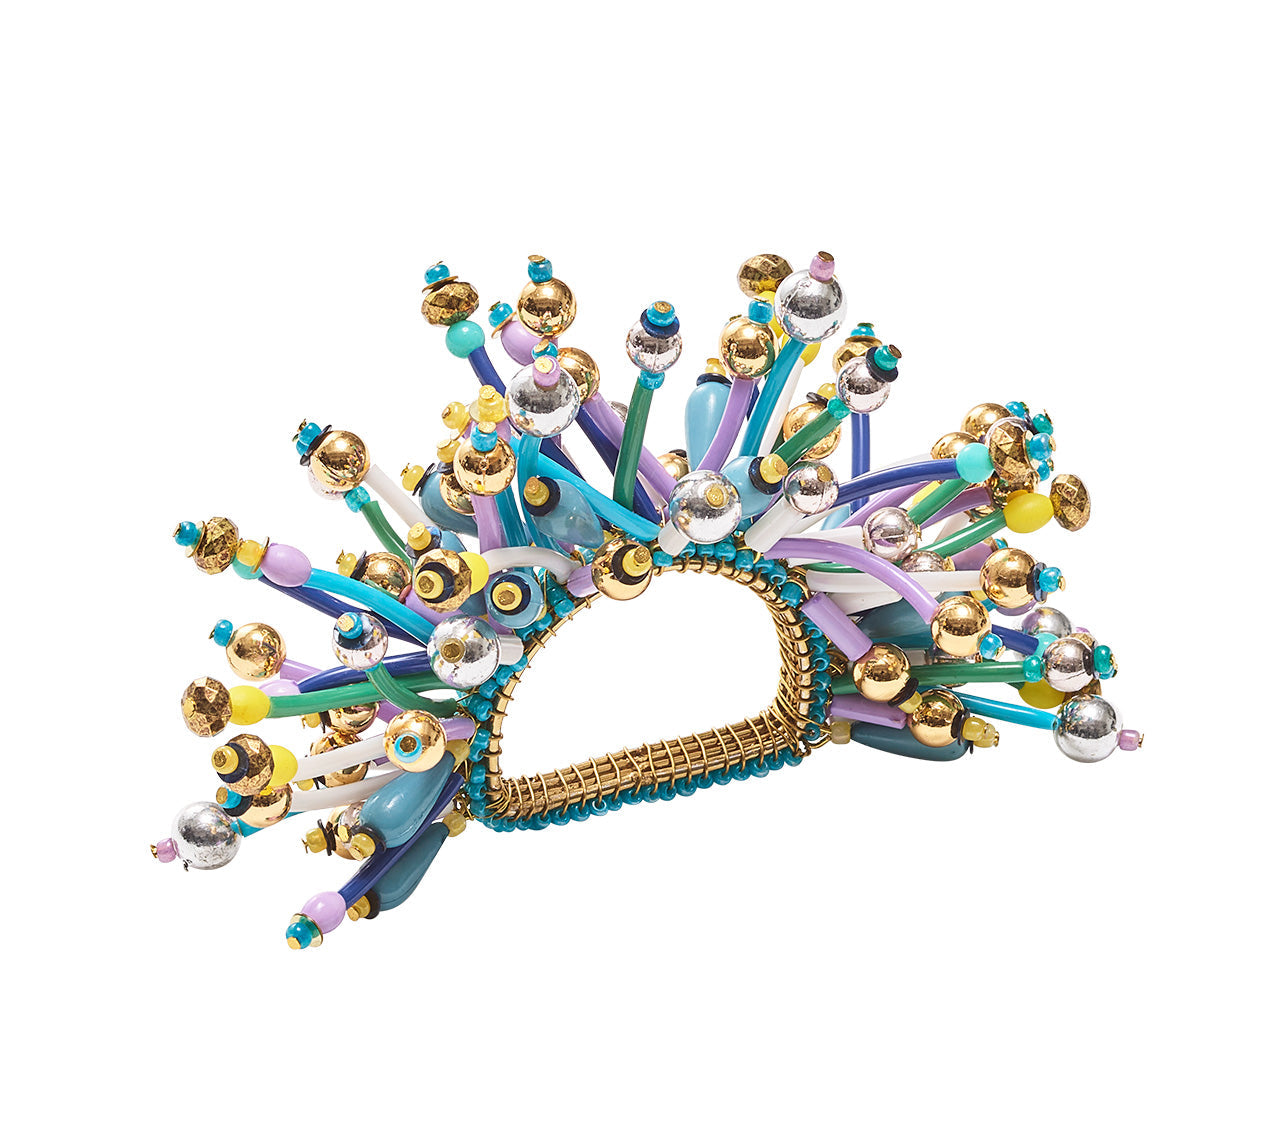 Fun Burst Napkin Ring with turquoise, lilac and white beads along with metallic gold and silver beads arranged as fringe